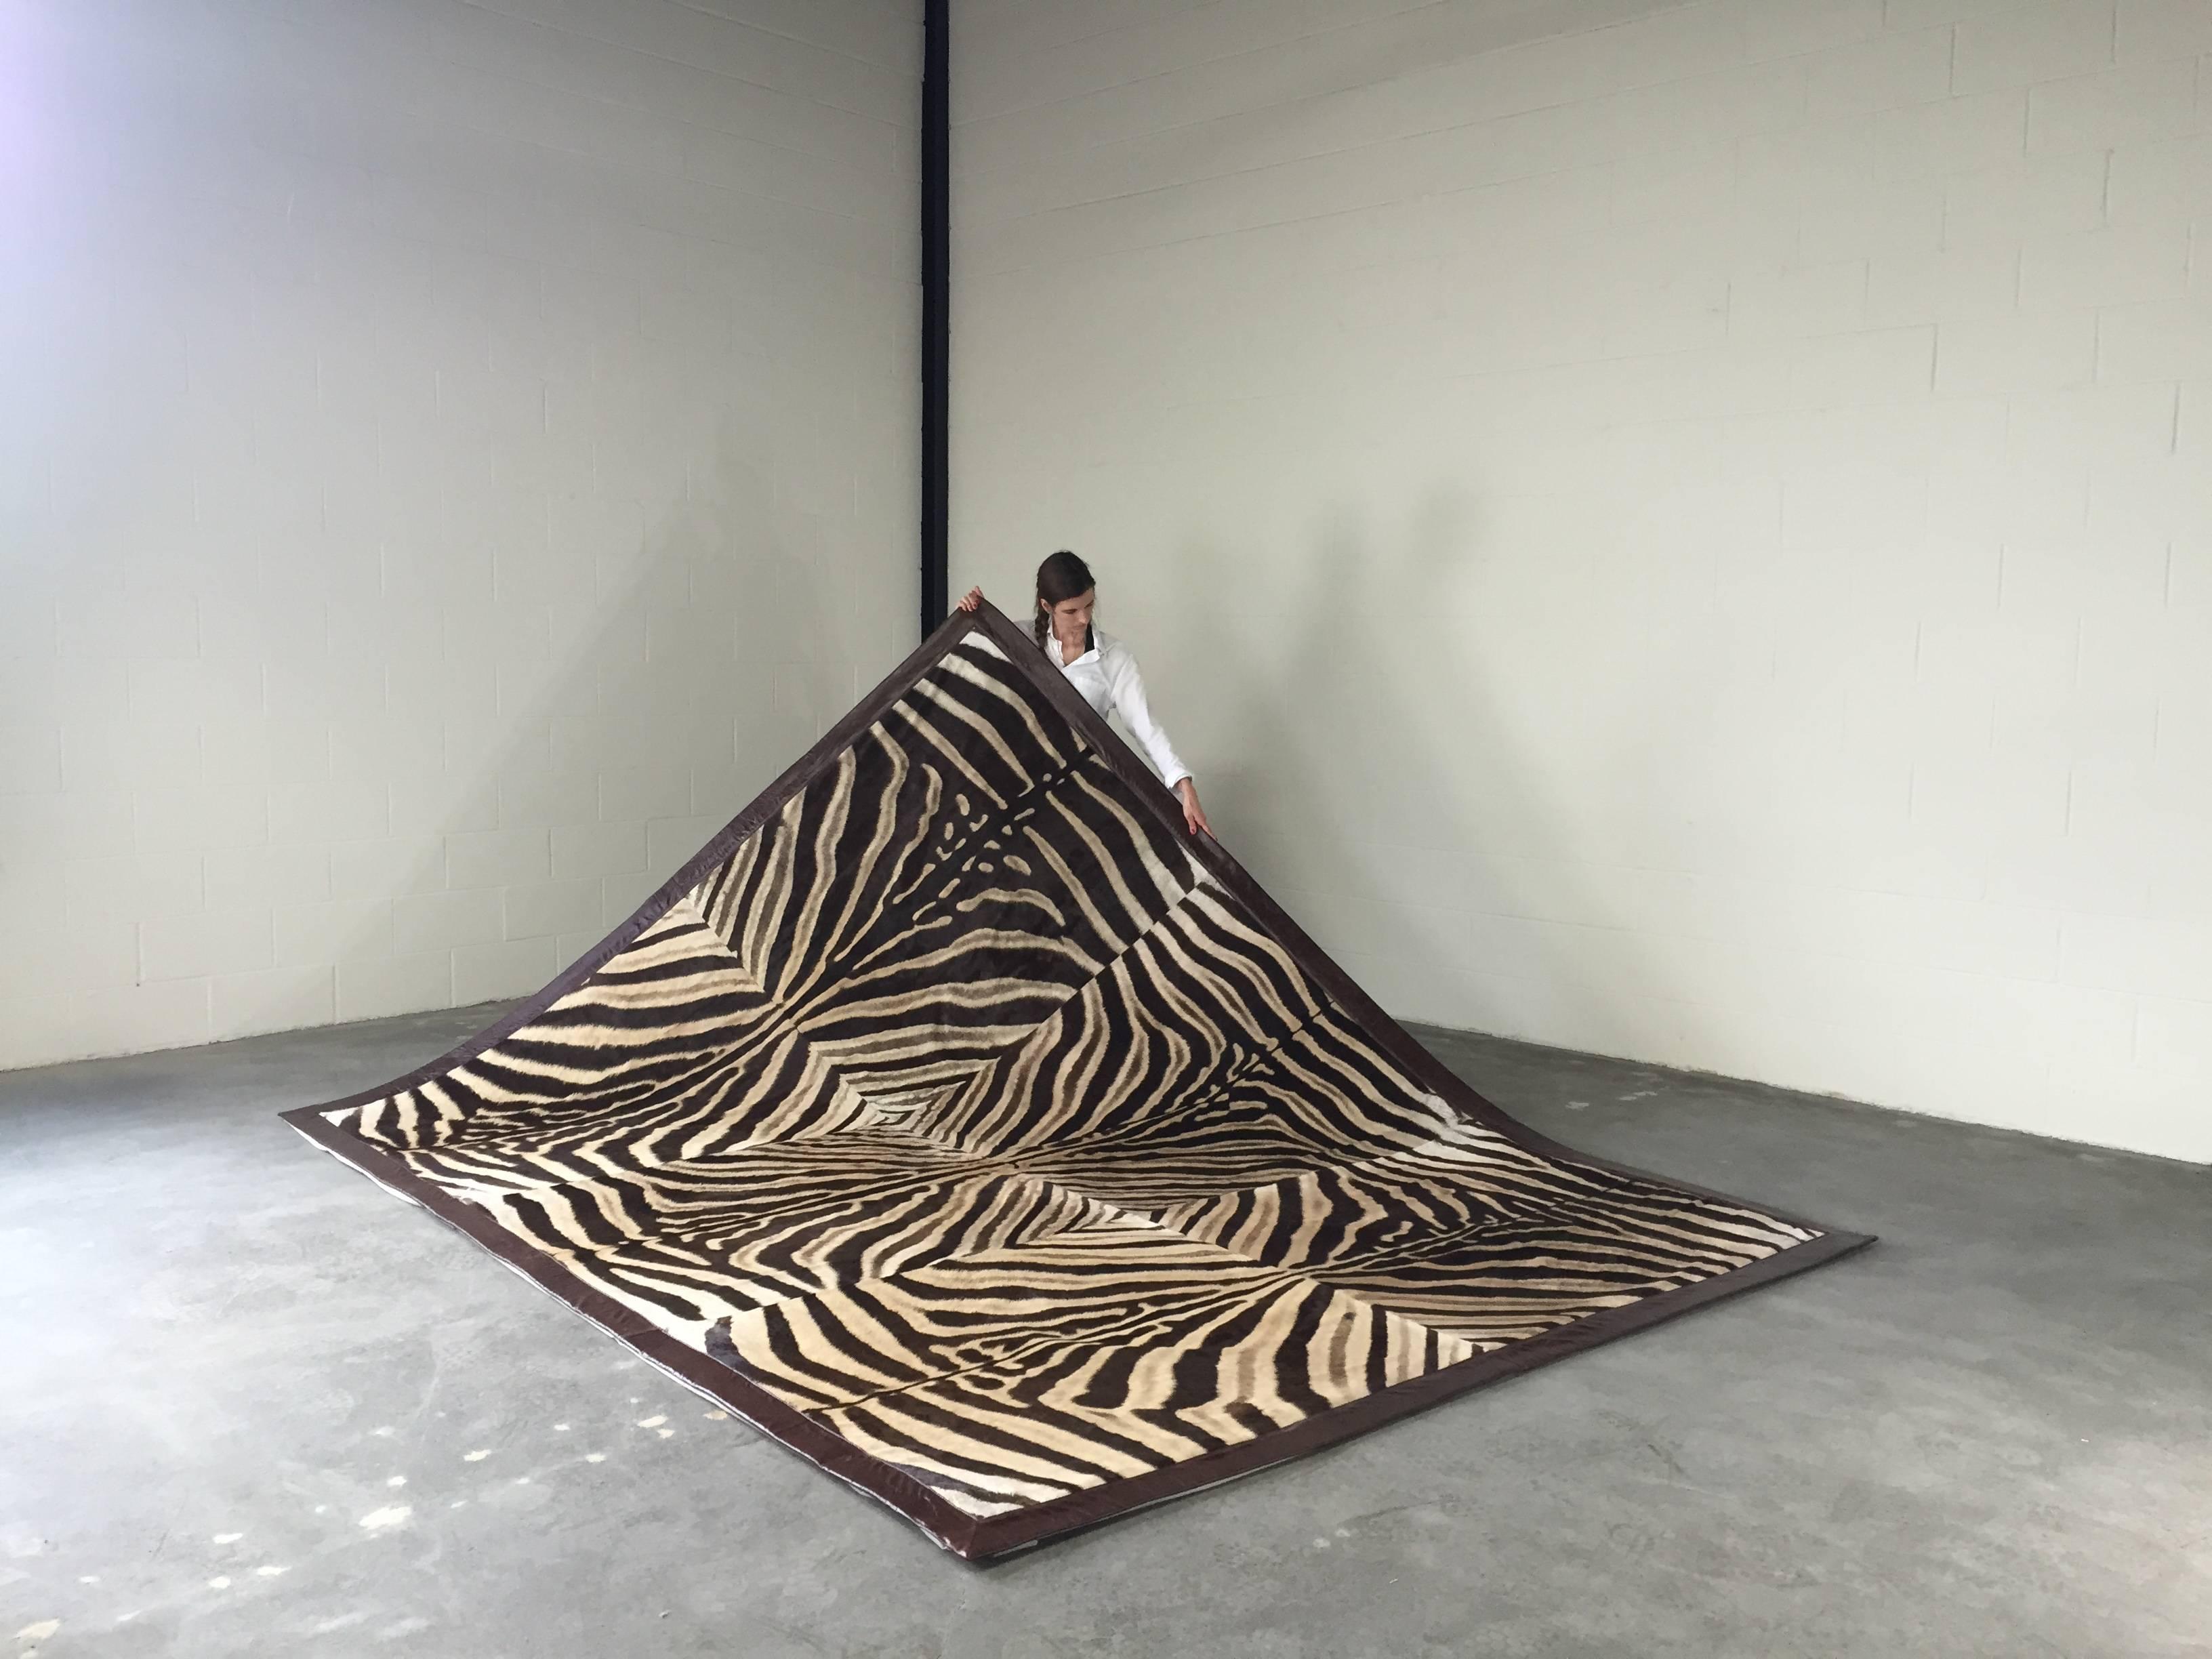 The Forsyth design team examined hundreds of zebra hides to perfectly match six beautiful hides for this amazing one of a kind rug. The natural stripe patterns create a truly breathtaking work of modern art.

Each hide is hand-cut and